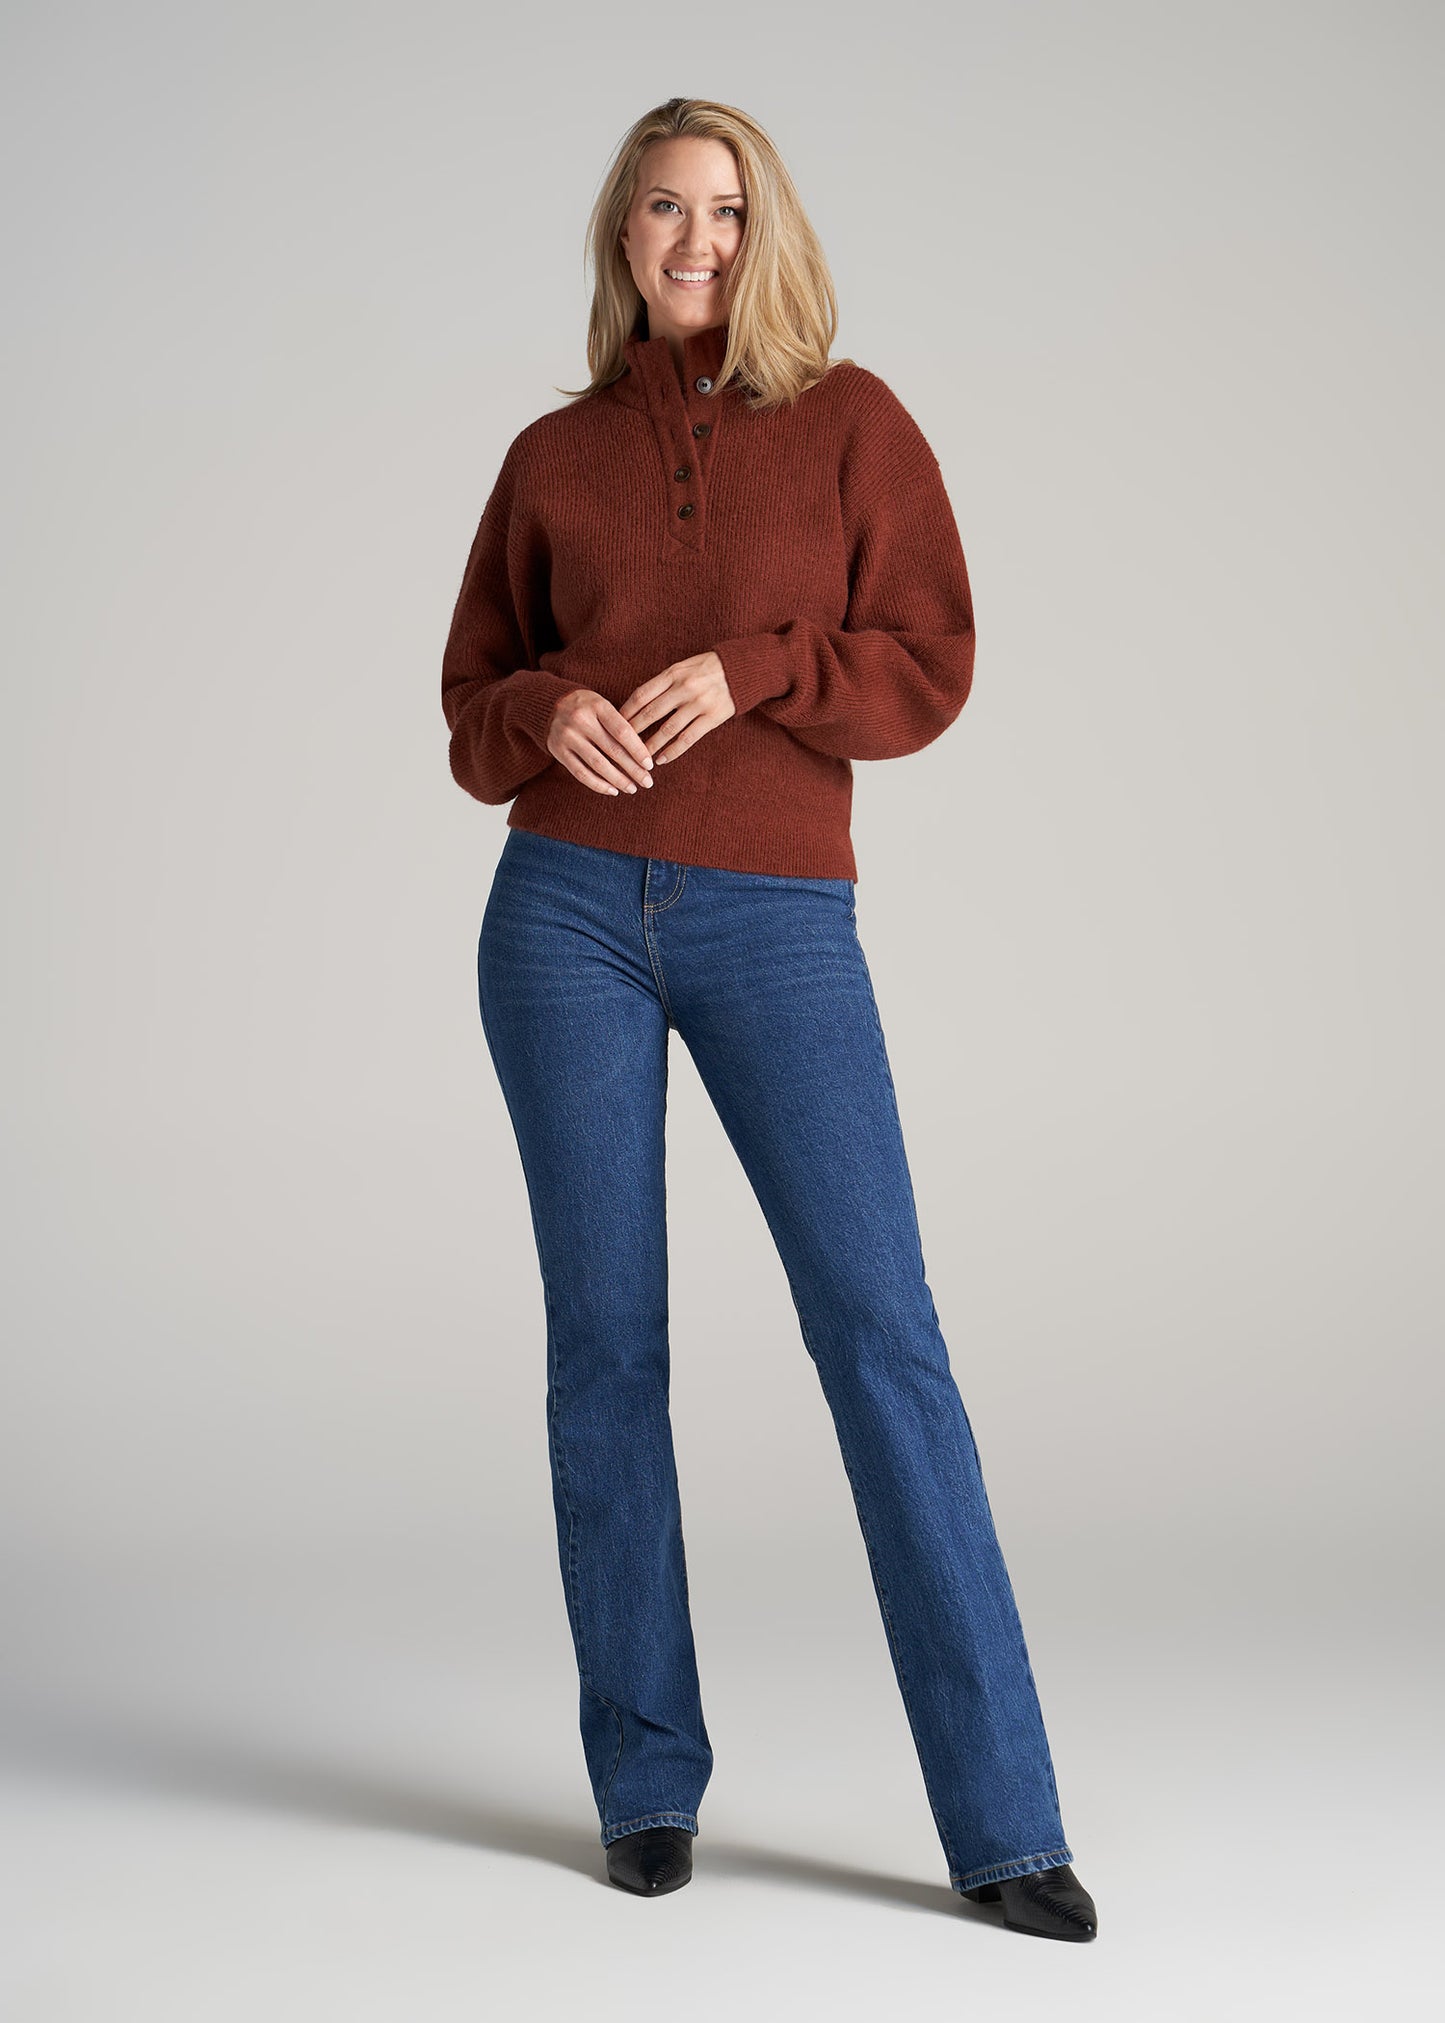       American-Tall-Women-Button-Front-Mock-Neck-Sweater-Copper-full